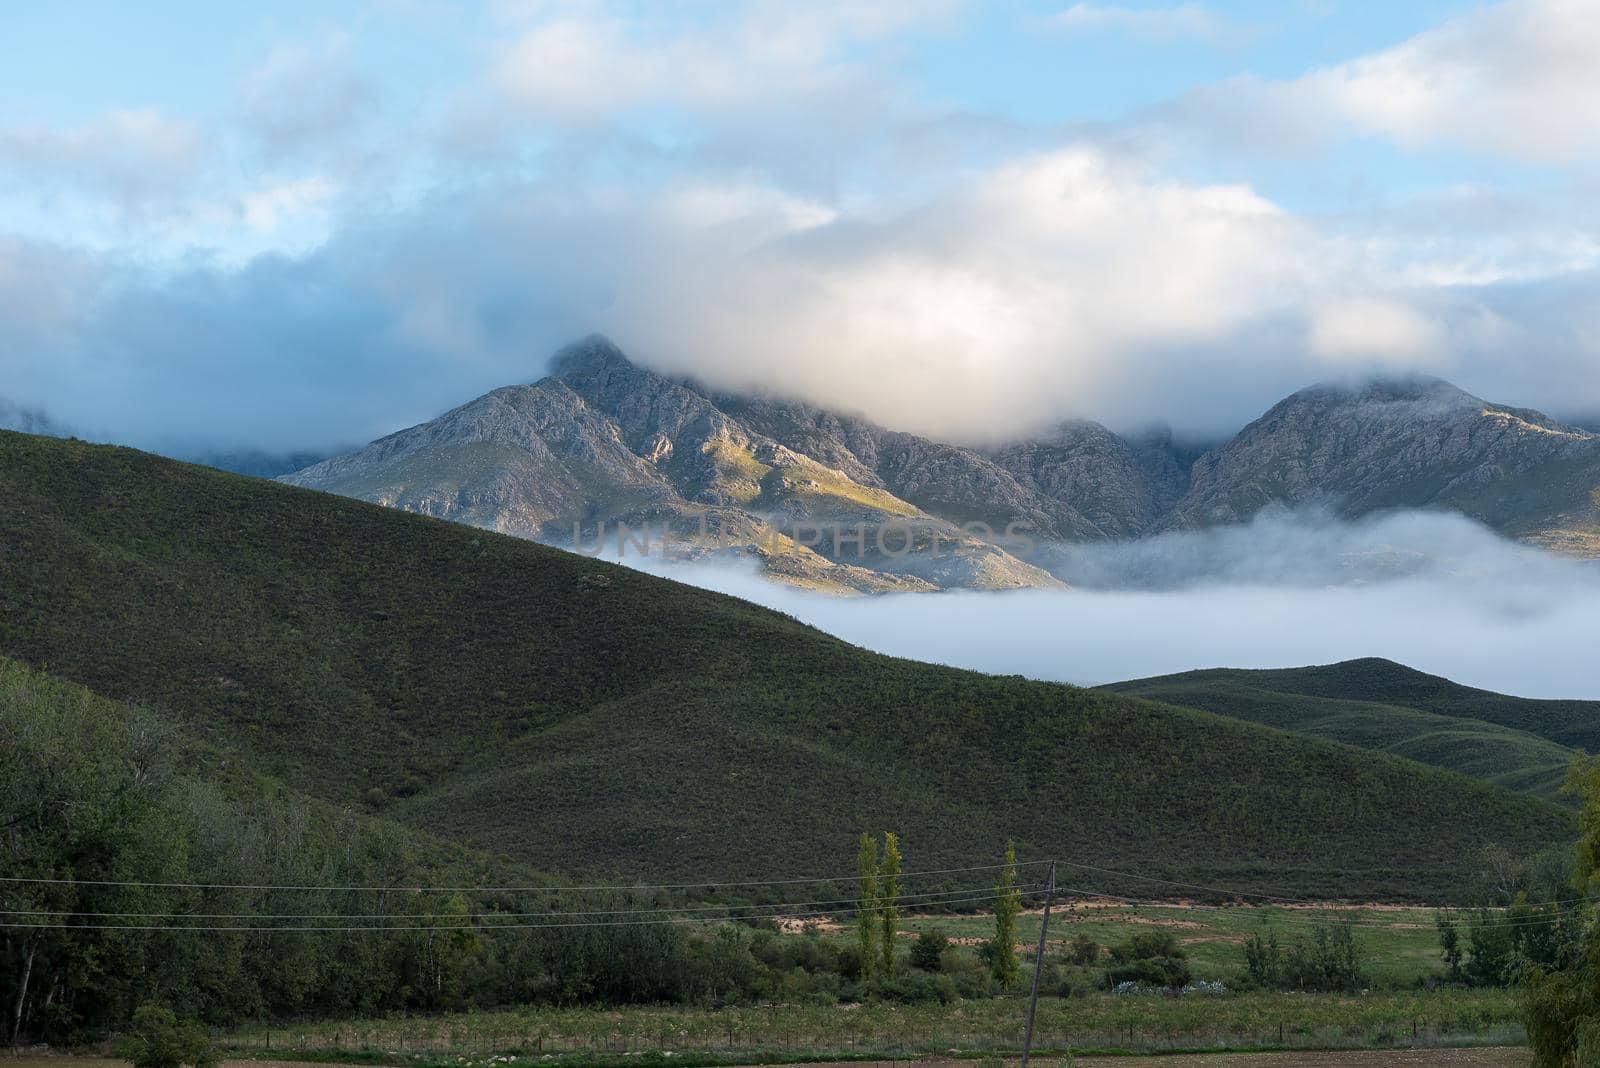 View of the Swartberg Mountains at Kruisrivier in the Western Cape Karoo